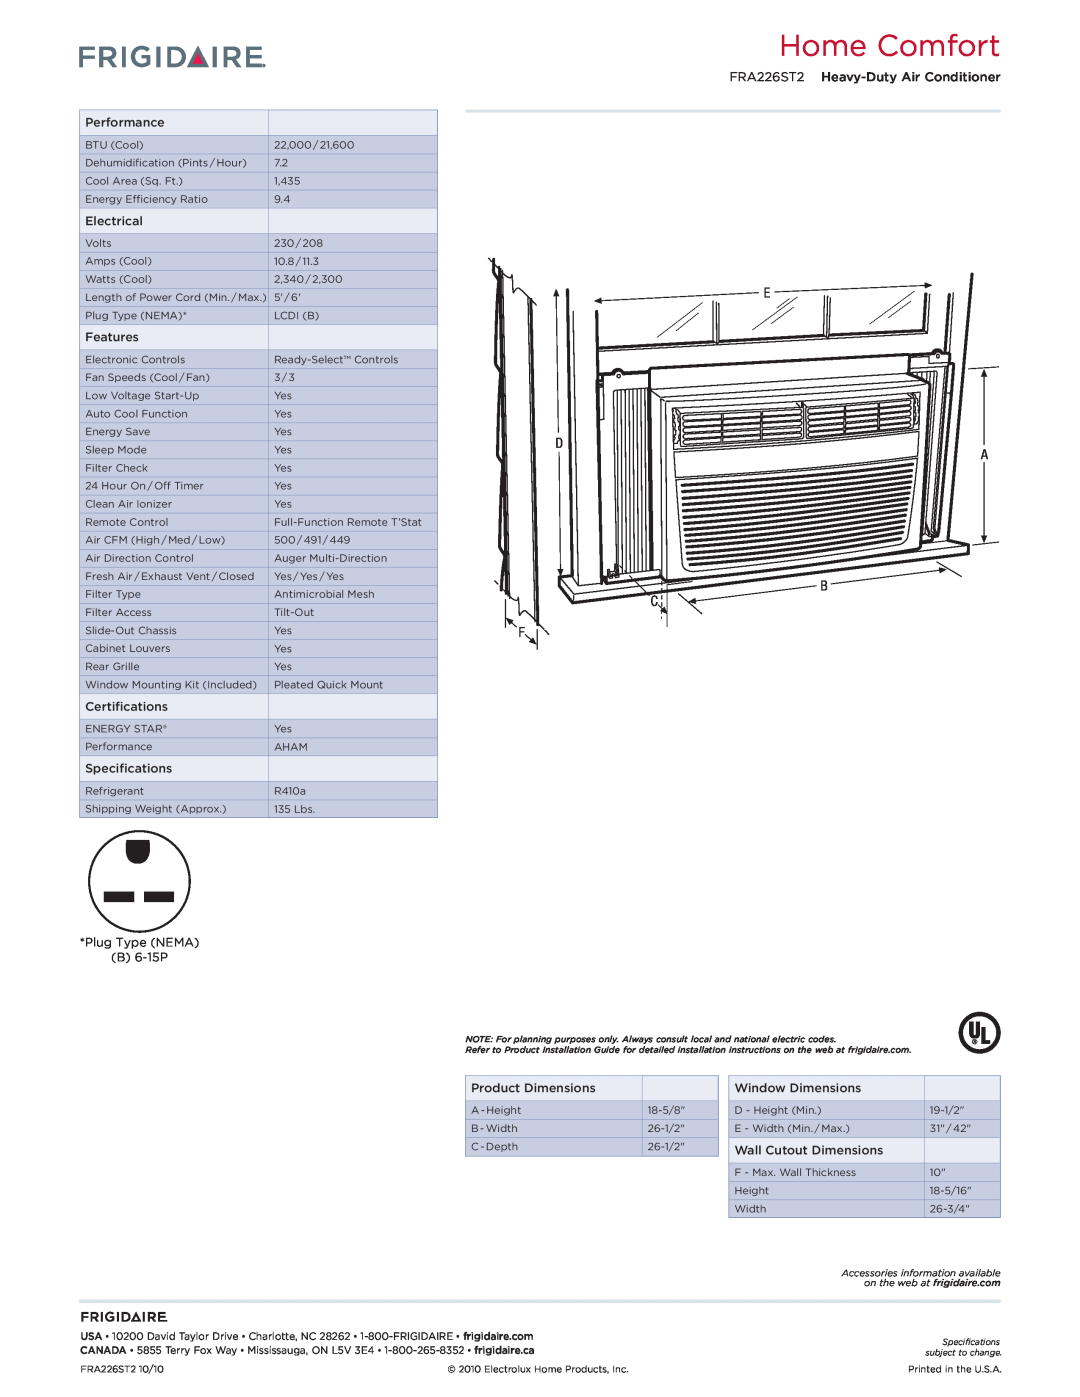 Frigidaire dimensions Home Comfort, E D A B C F, FRA226ST2 Heavy-Duty Air Conditioner 